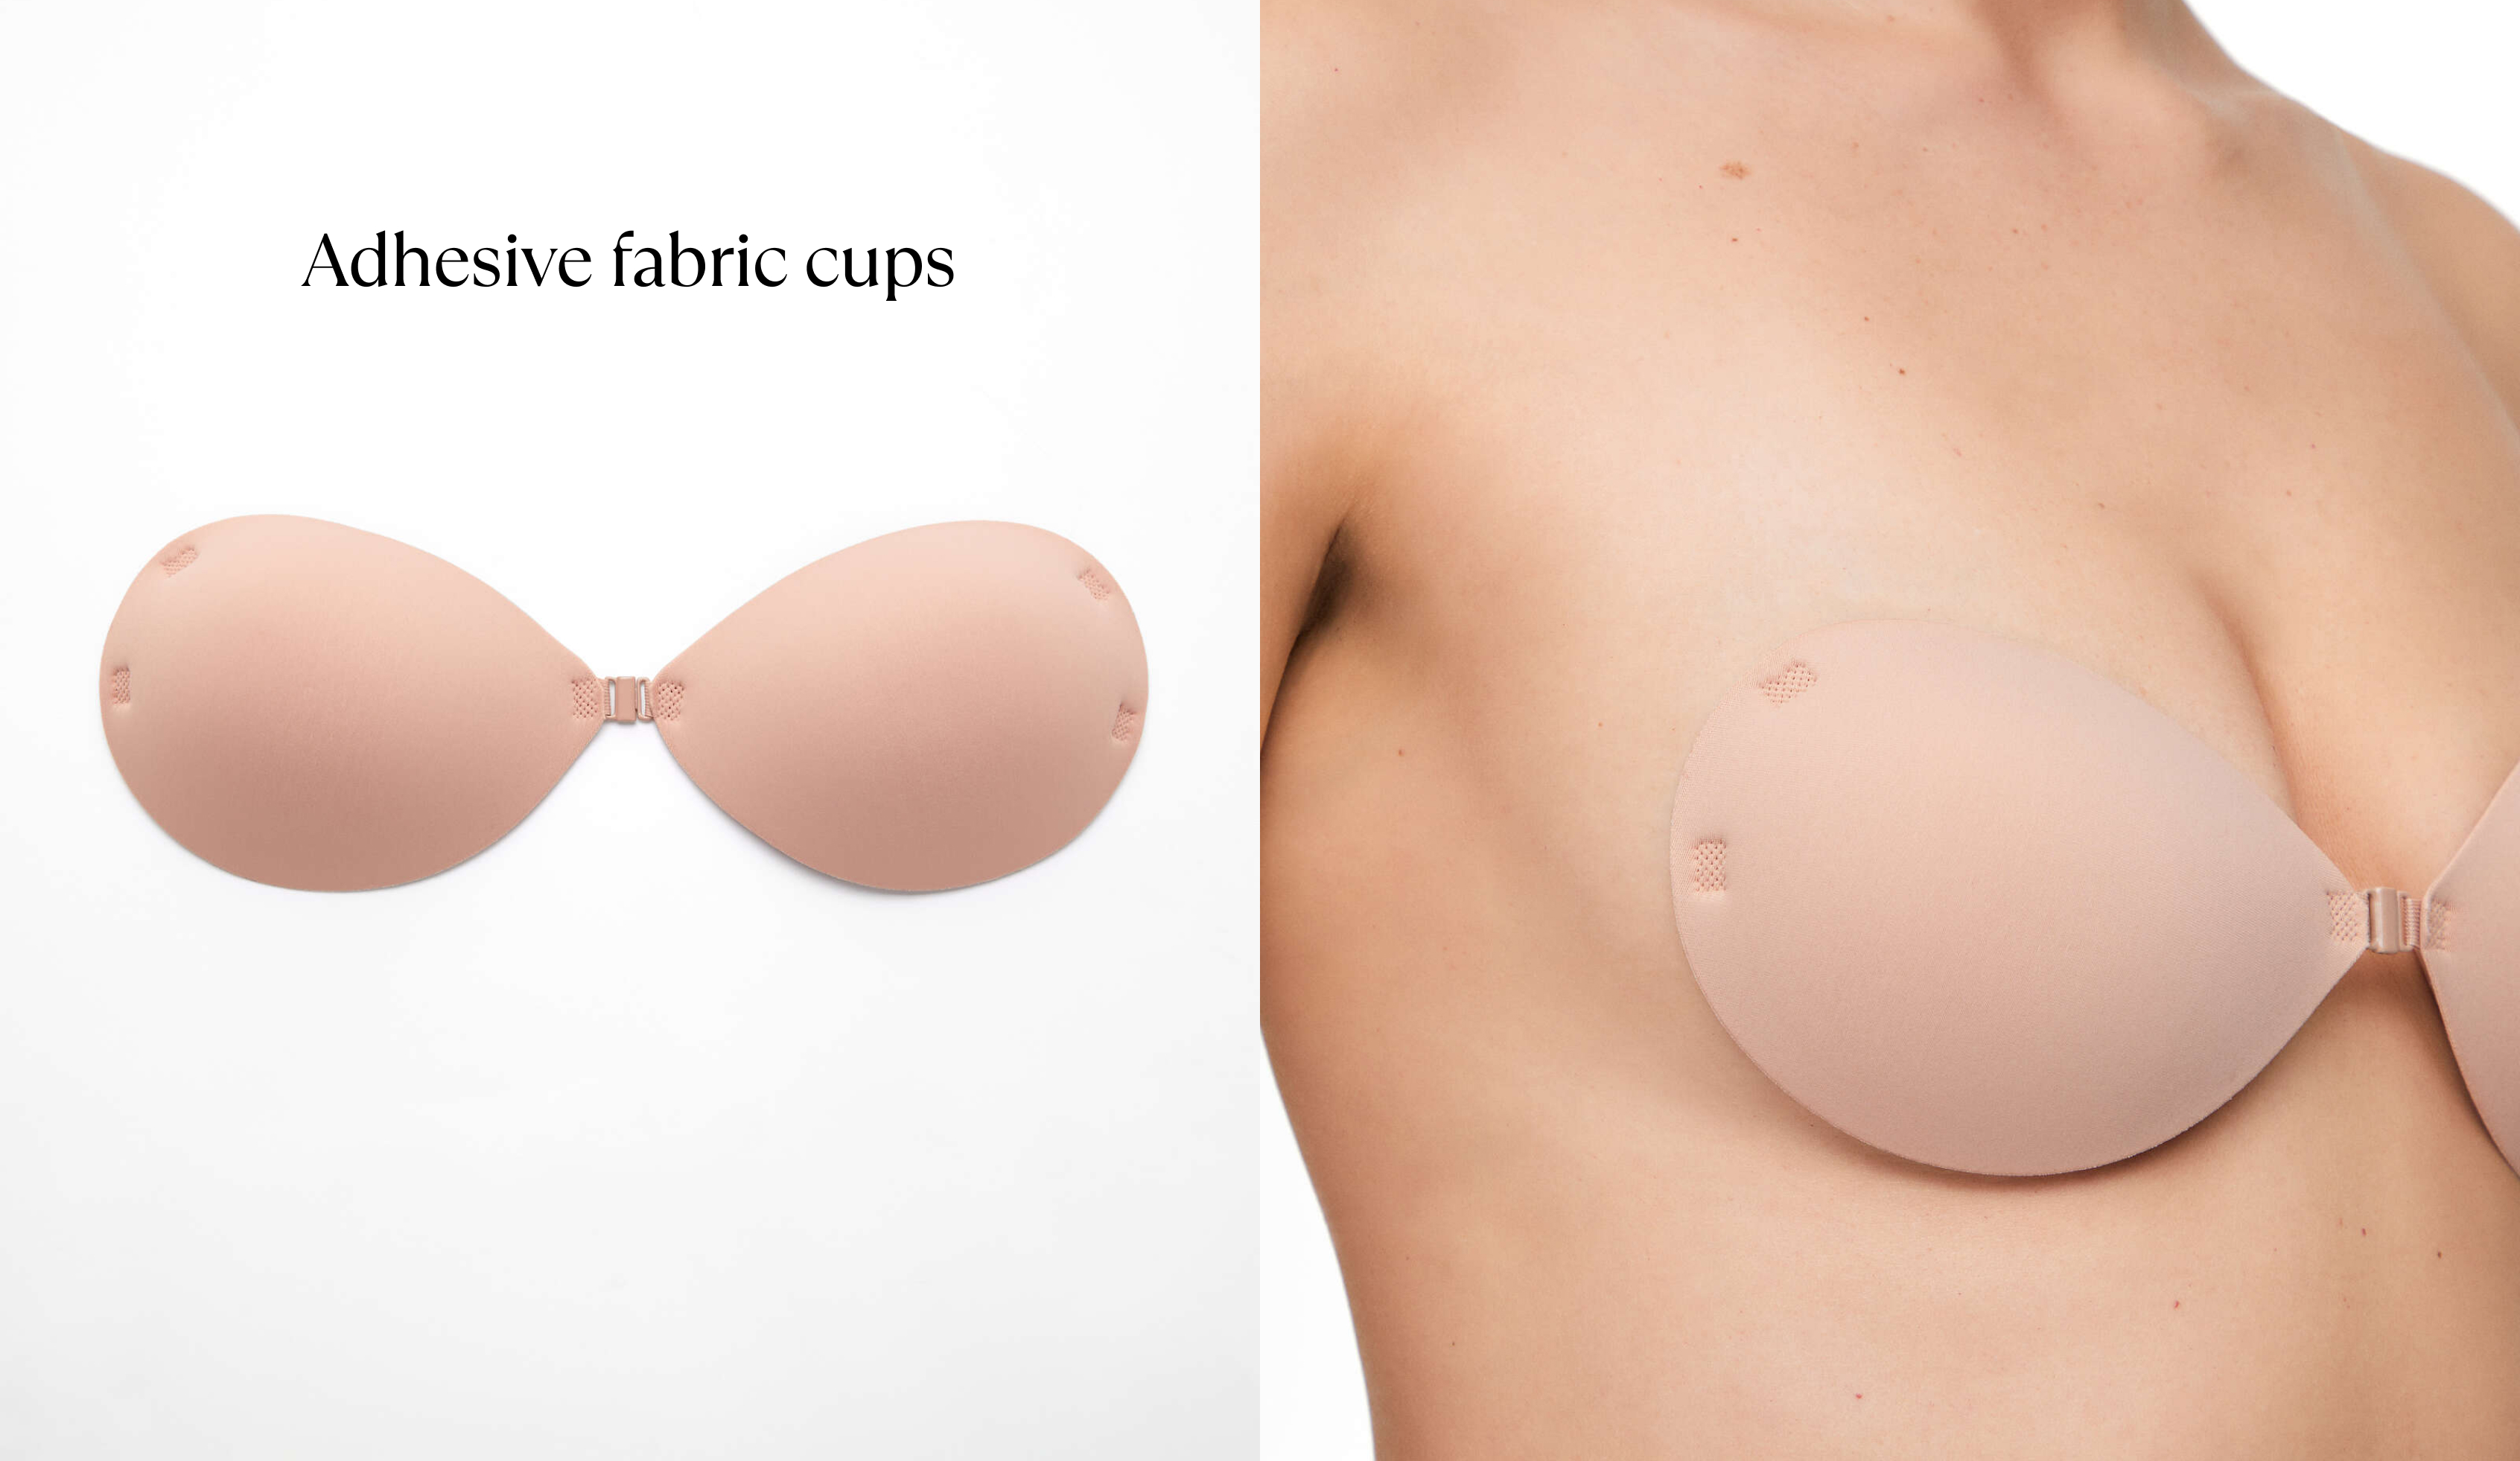 Adhesive fabric cups